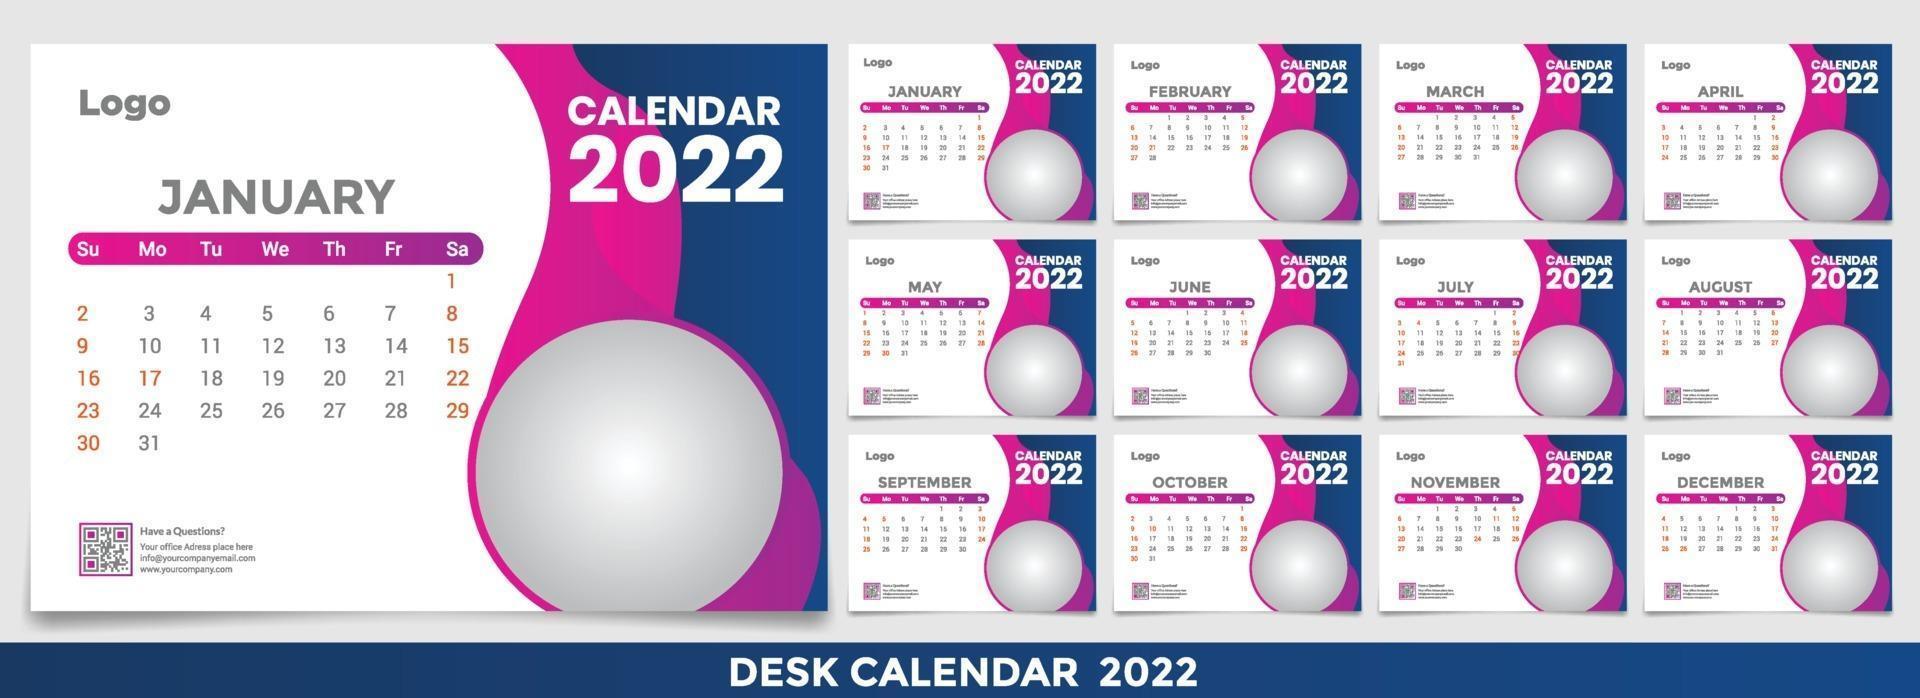 Calendar 2022, Set Desk Calendar template design with Place for Photo and Company Logo. The week Monday on Sunday. Set of 12 Months vector